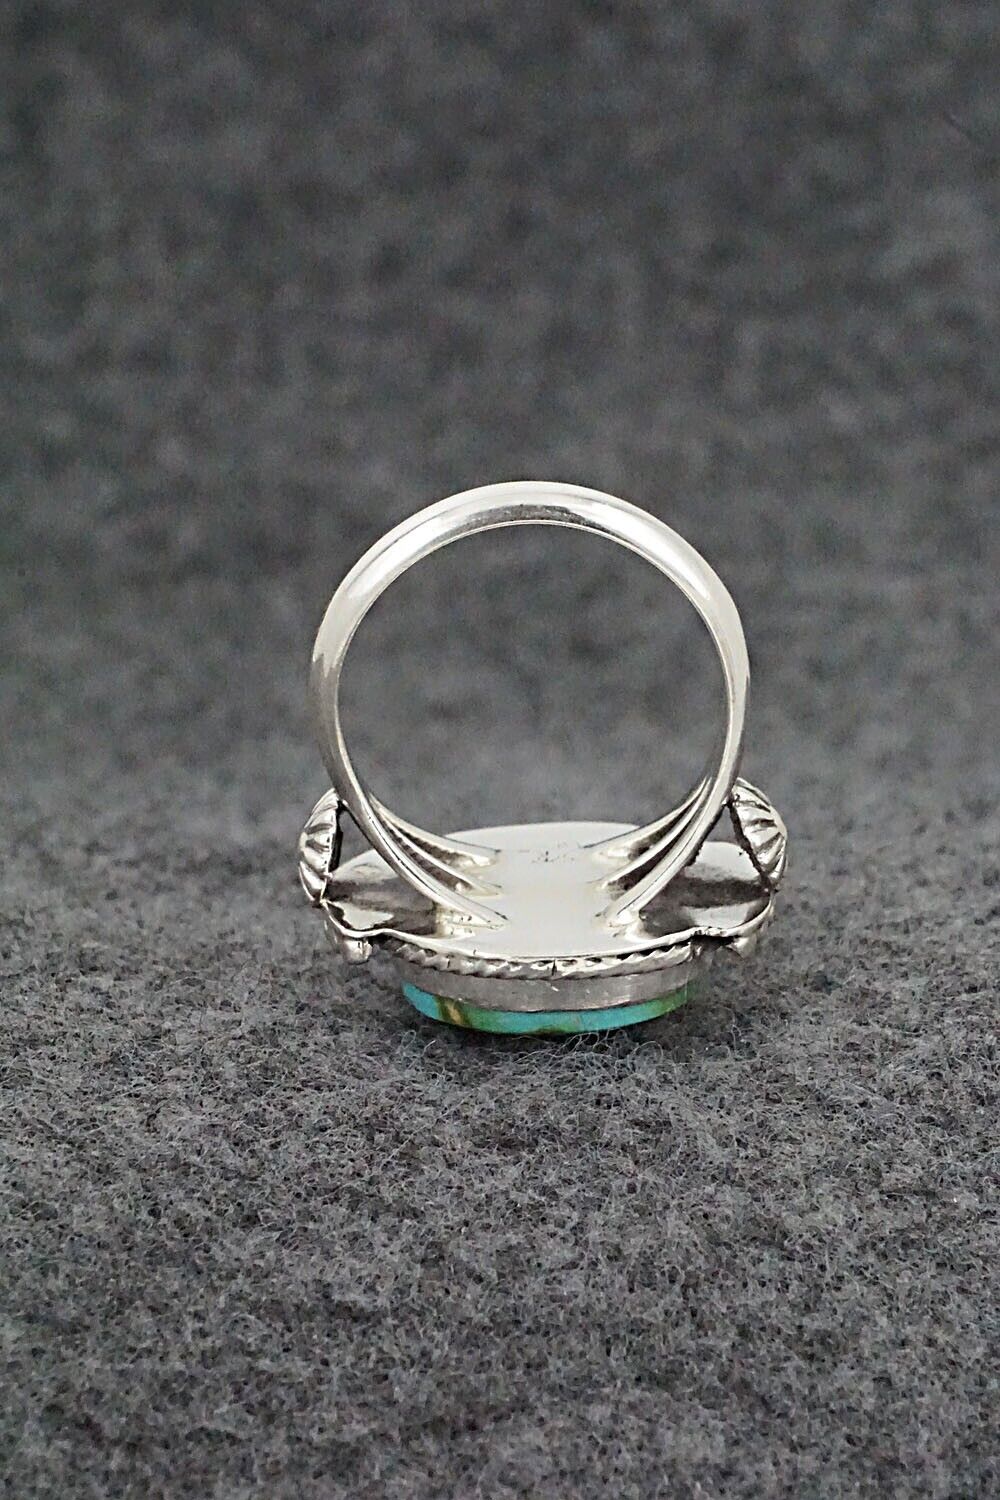 Turquoise & Sterling Silver Ring - Andrew Vandever - Size 7.75